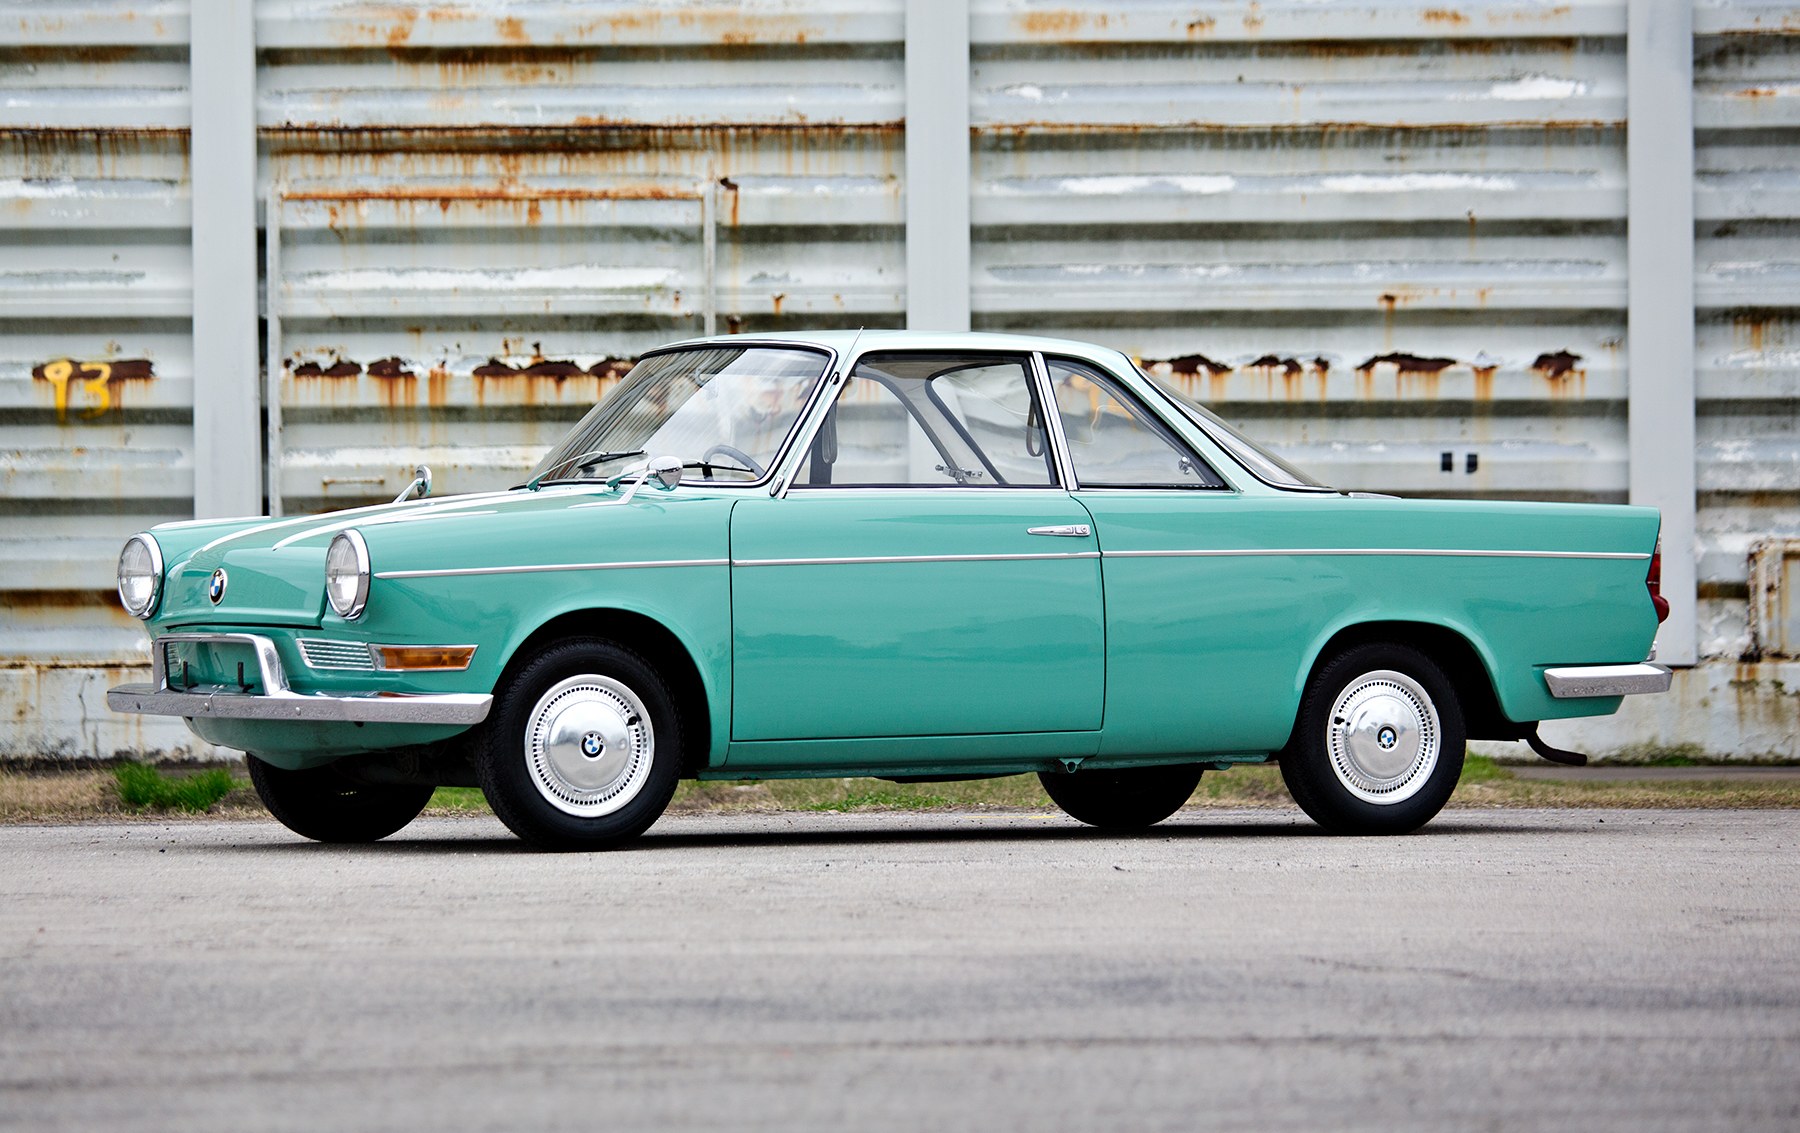 1965 BMW 700 LS Coupe